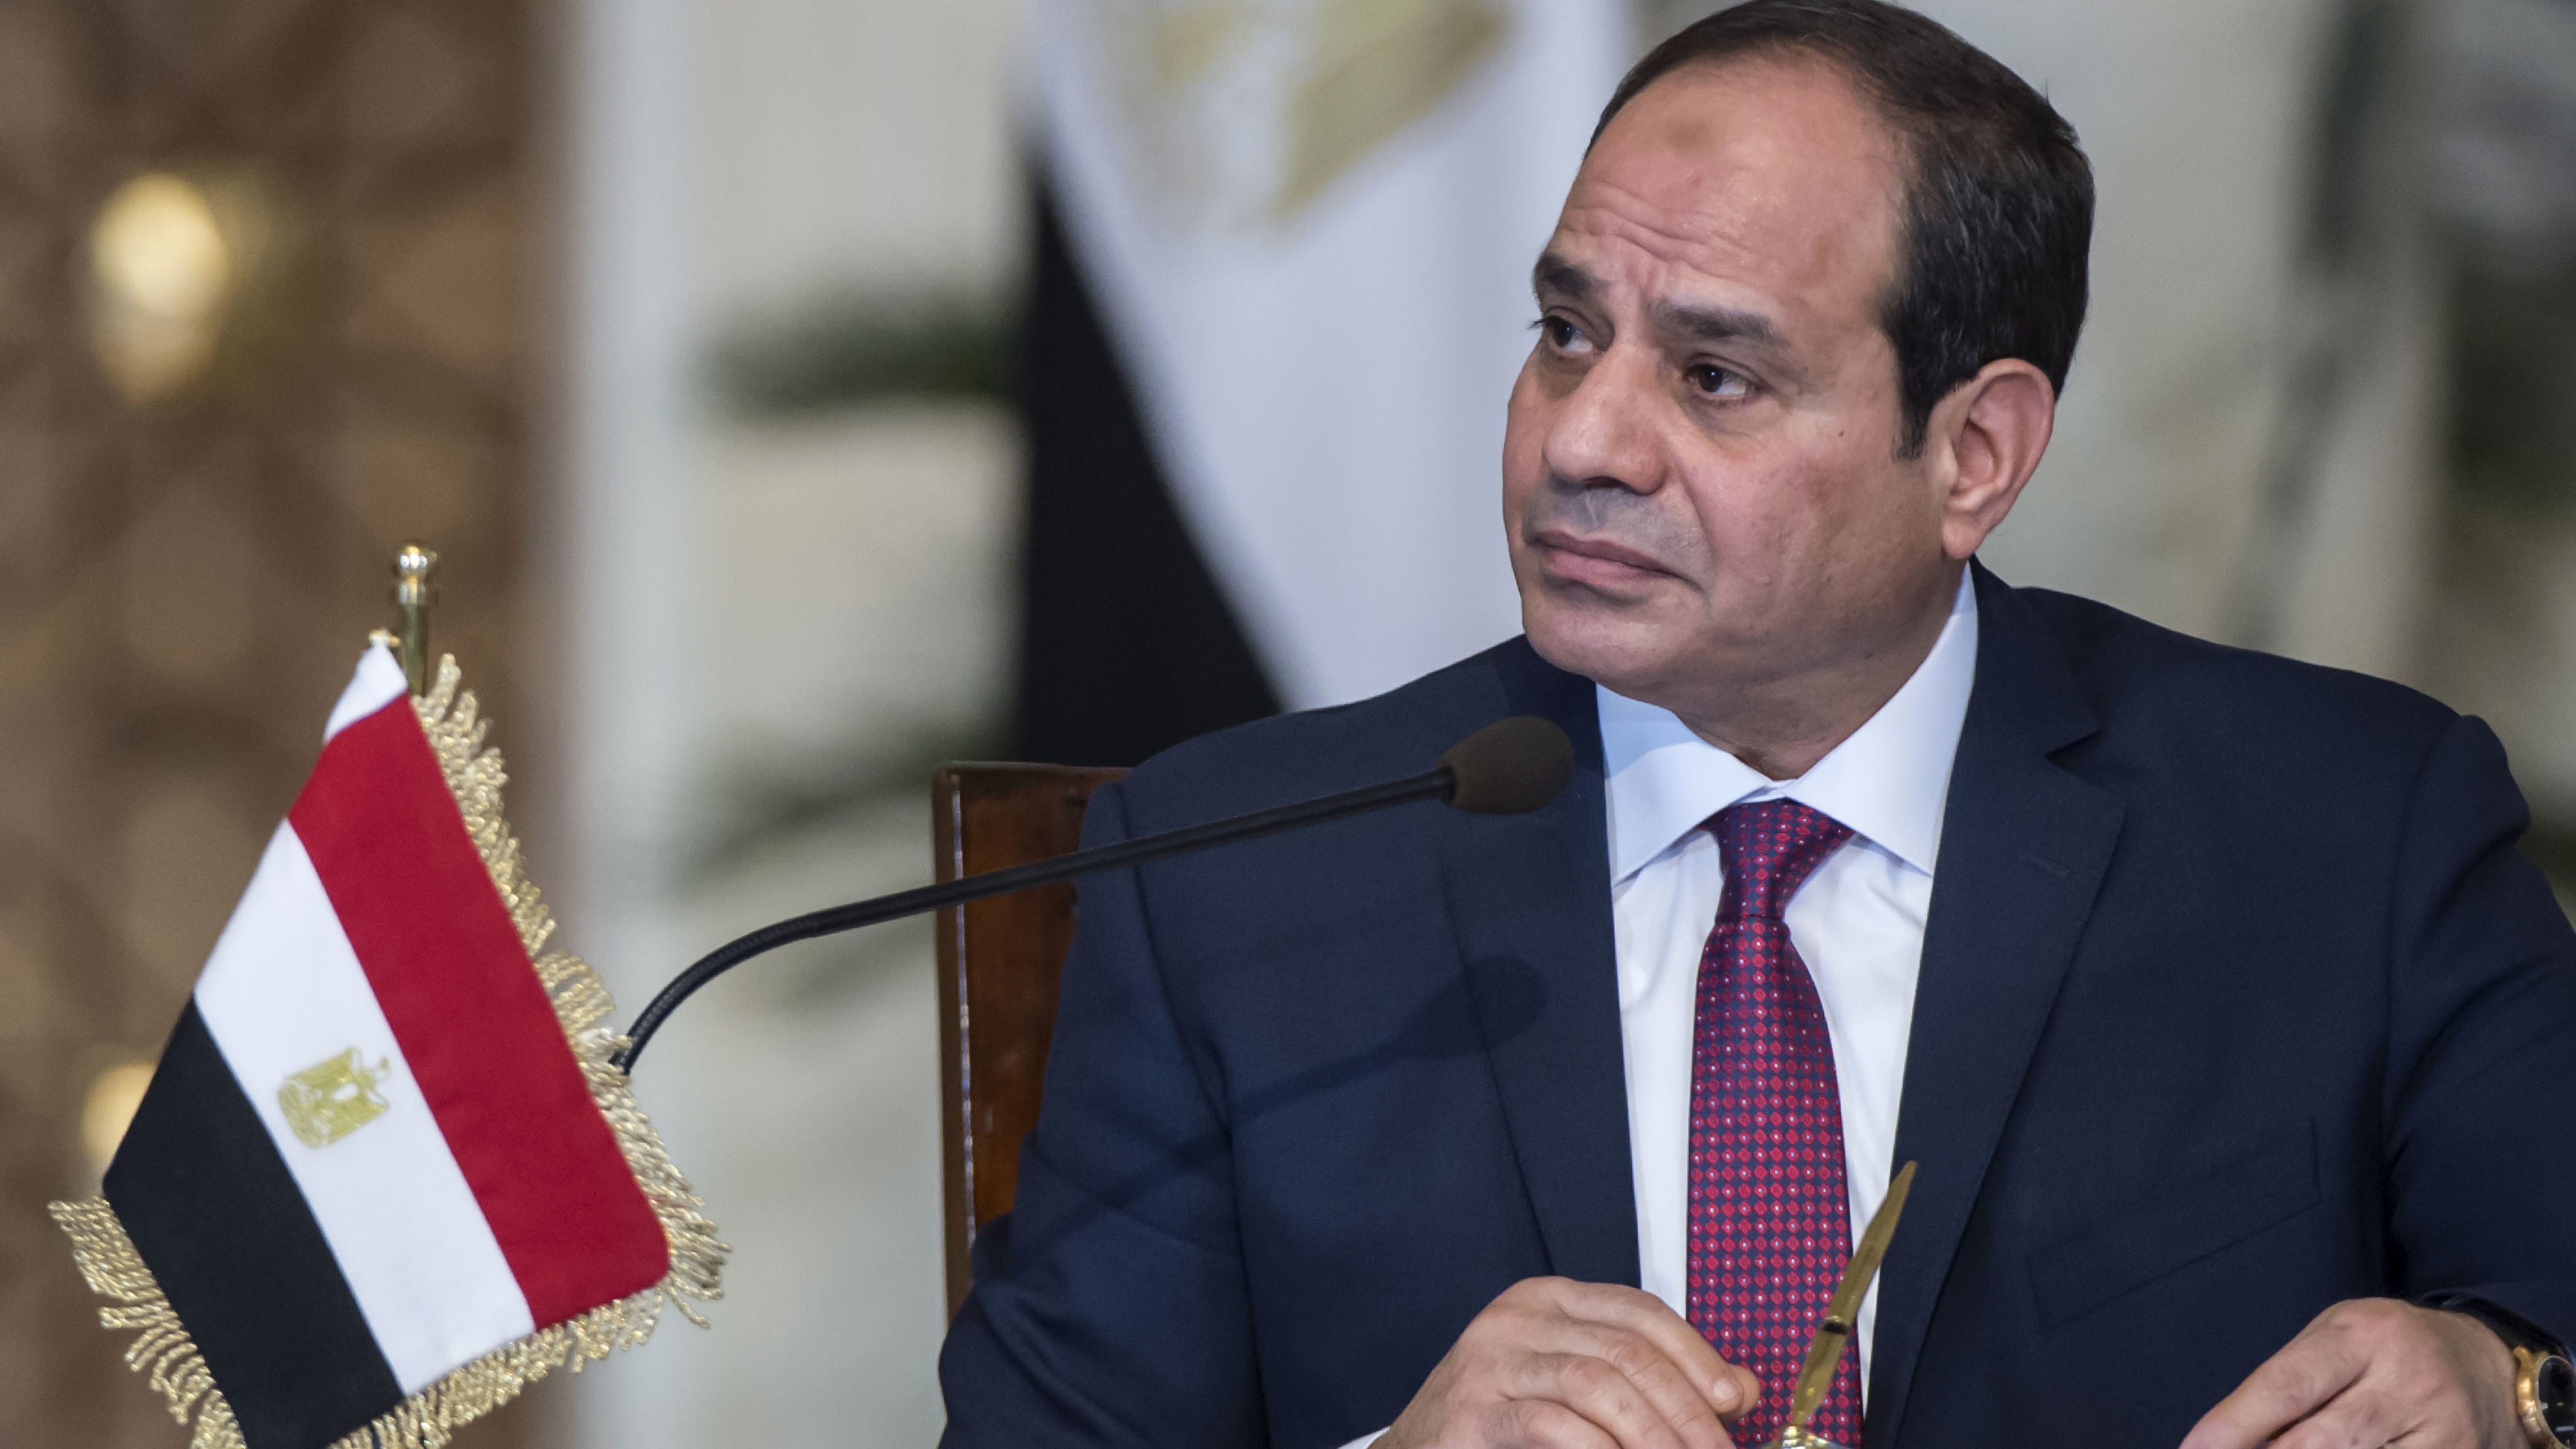 The Biden administration plans to release most of a controversial $300 million tranche of aid for Egypt, which is led by President Abdel Fattah el-Sisi.